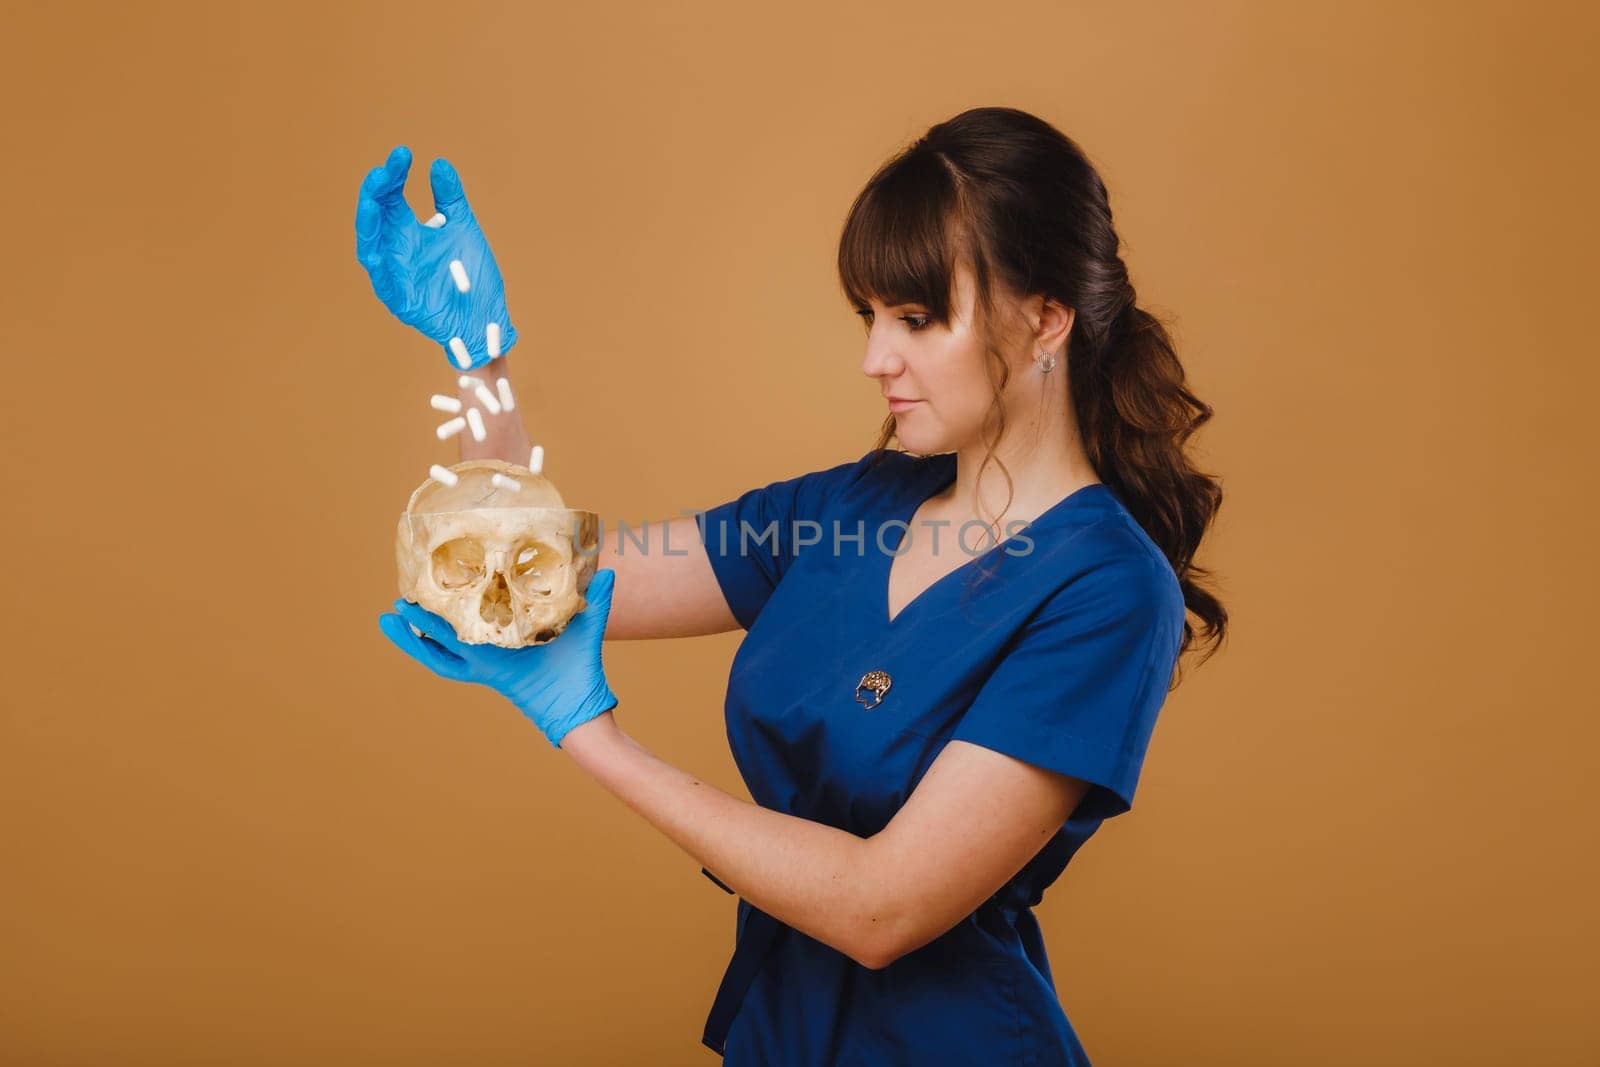 Cute young doctor girl holding a human skull, brown background behind the doctor.